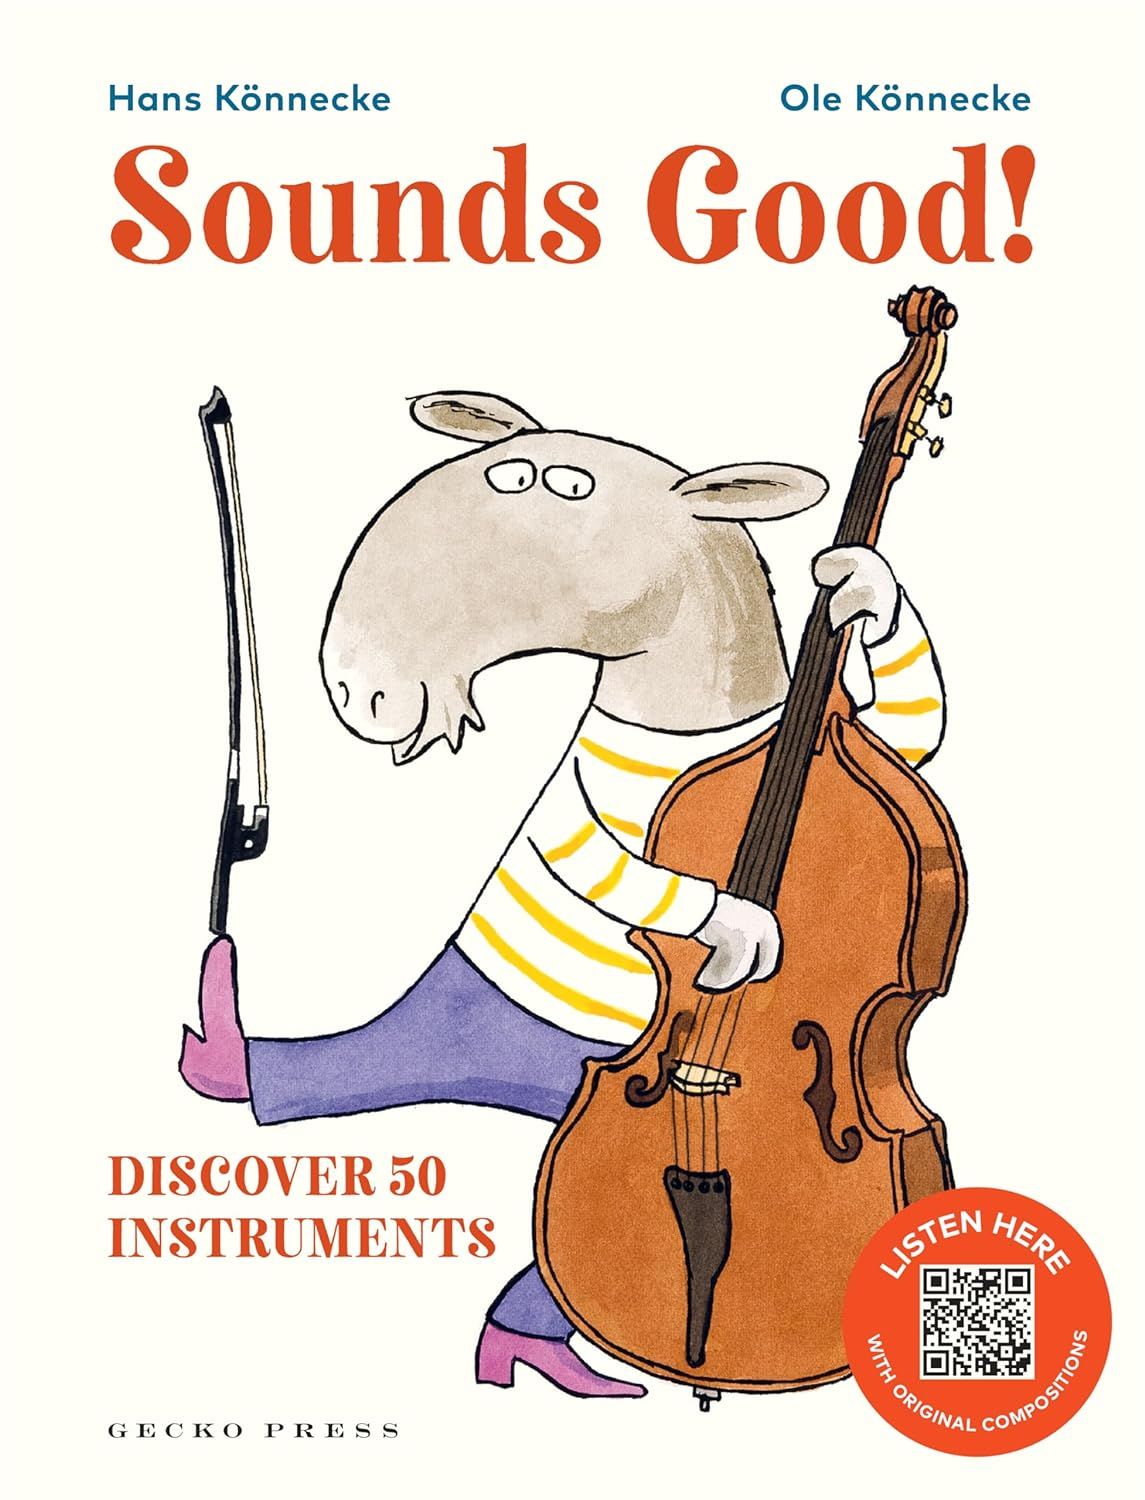 Cover of Sounds Good by Ole Könnecke, illustrated by Hans Könnecke